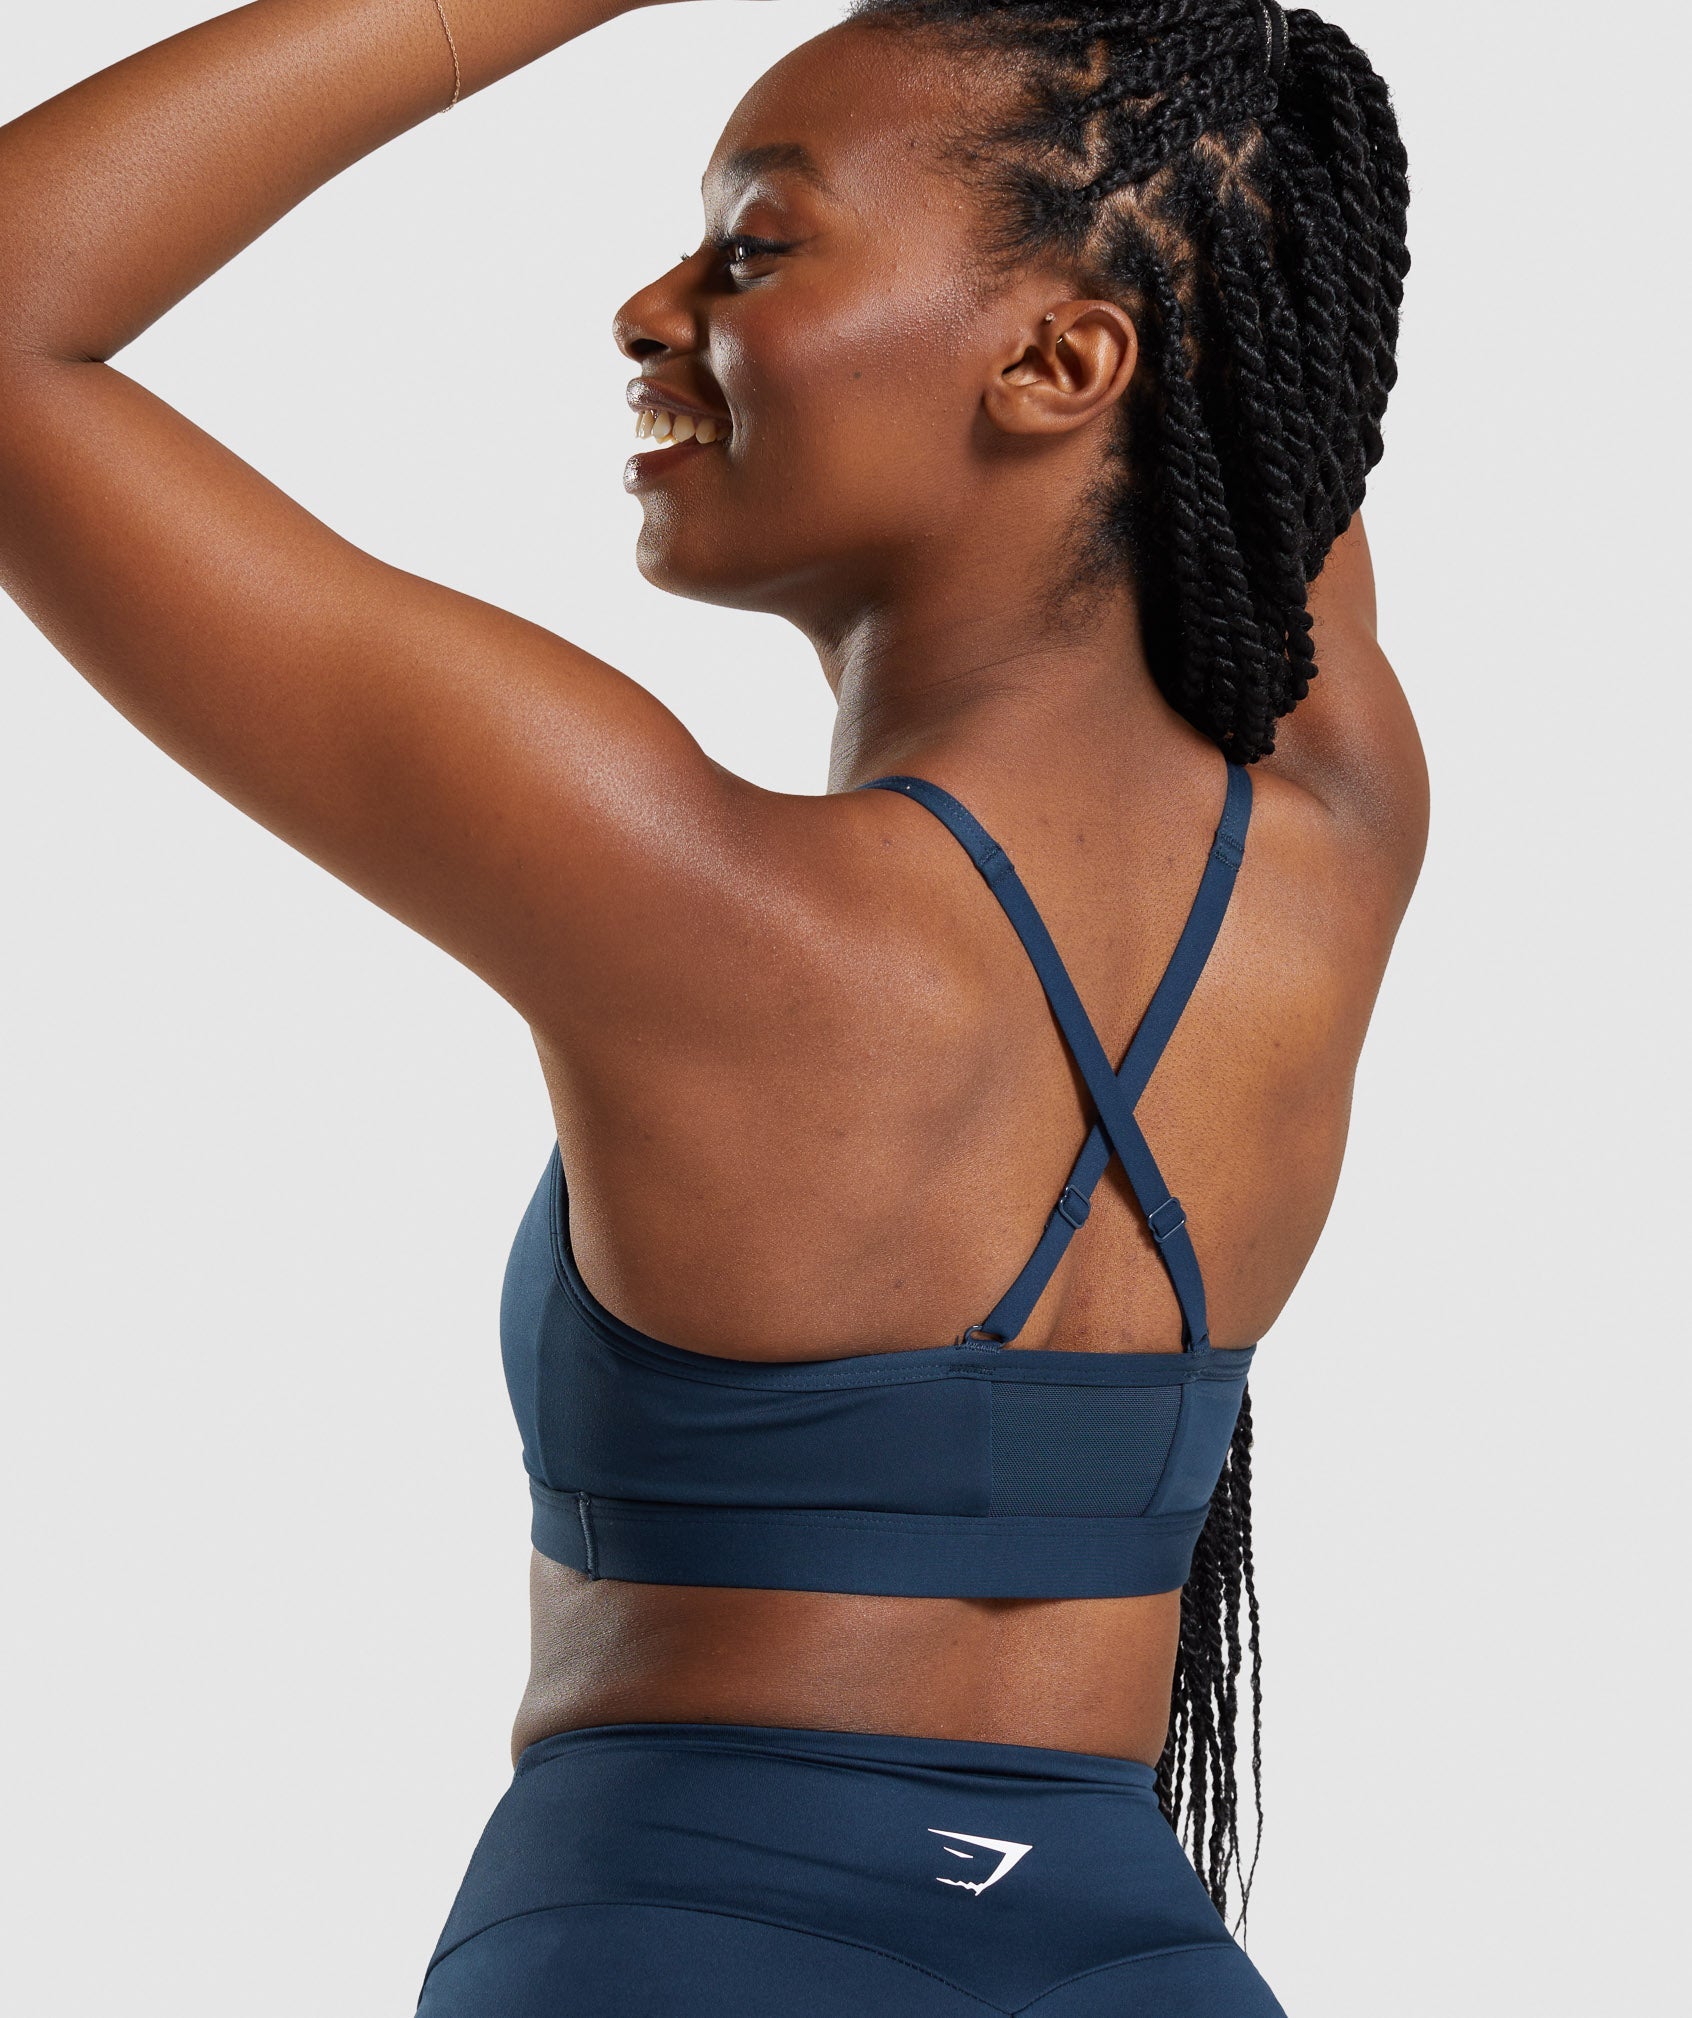 Ruched Sports Bra in Navy - view 5